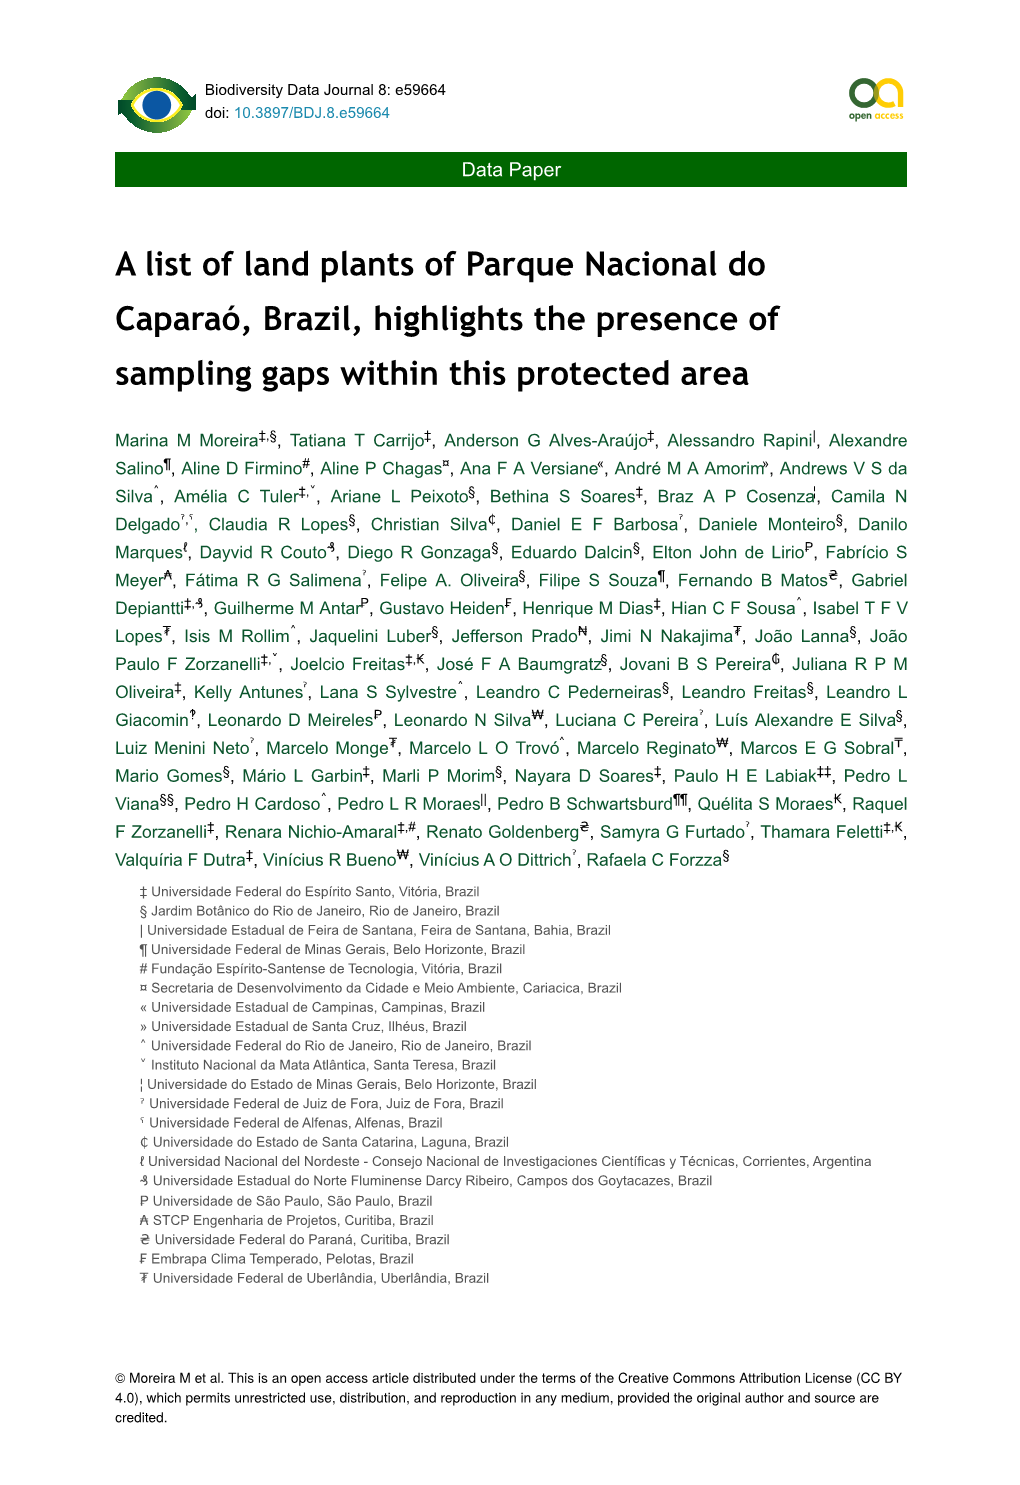 A List of Land Plants of Parque Nacional Do Caparaó, Brazil, Highlights the Presence of Sampling Gaps Within This Protected Area